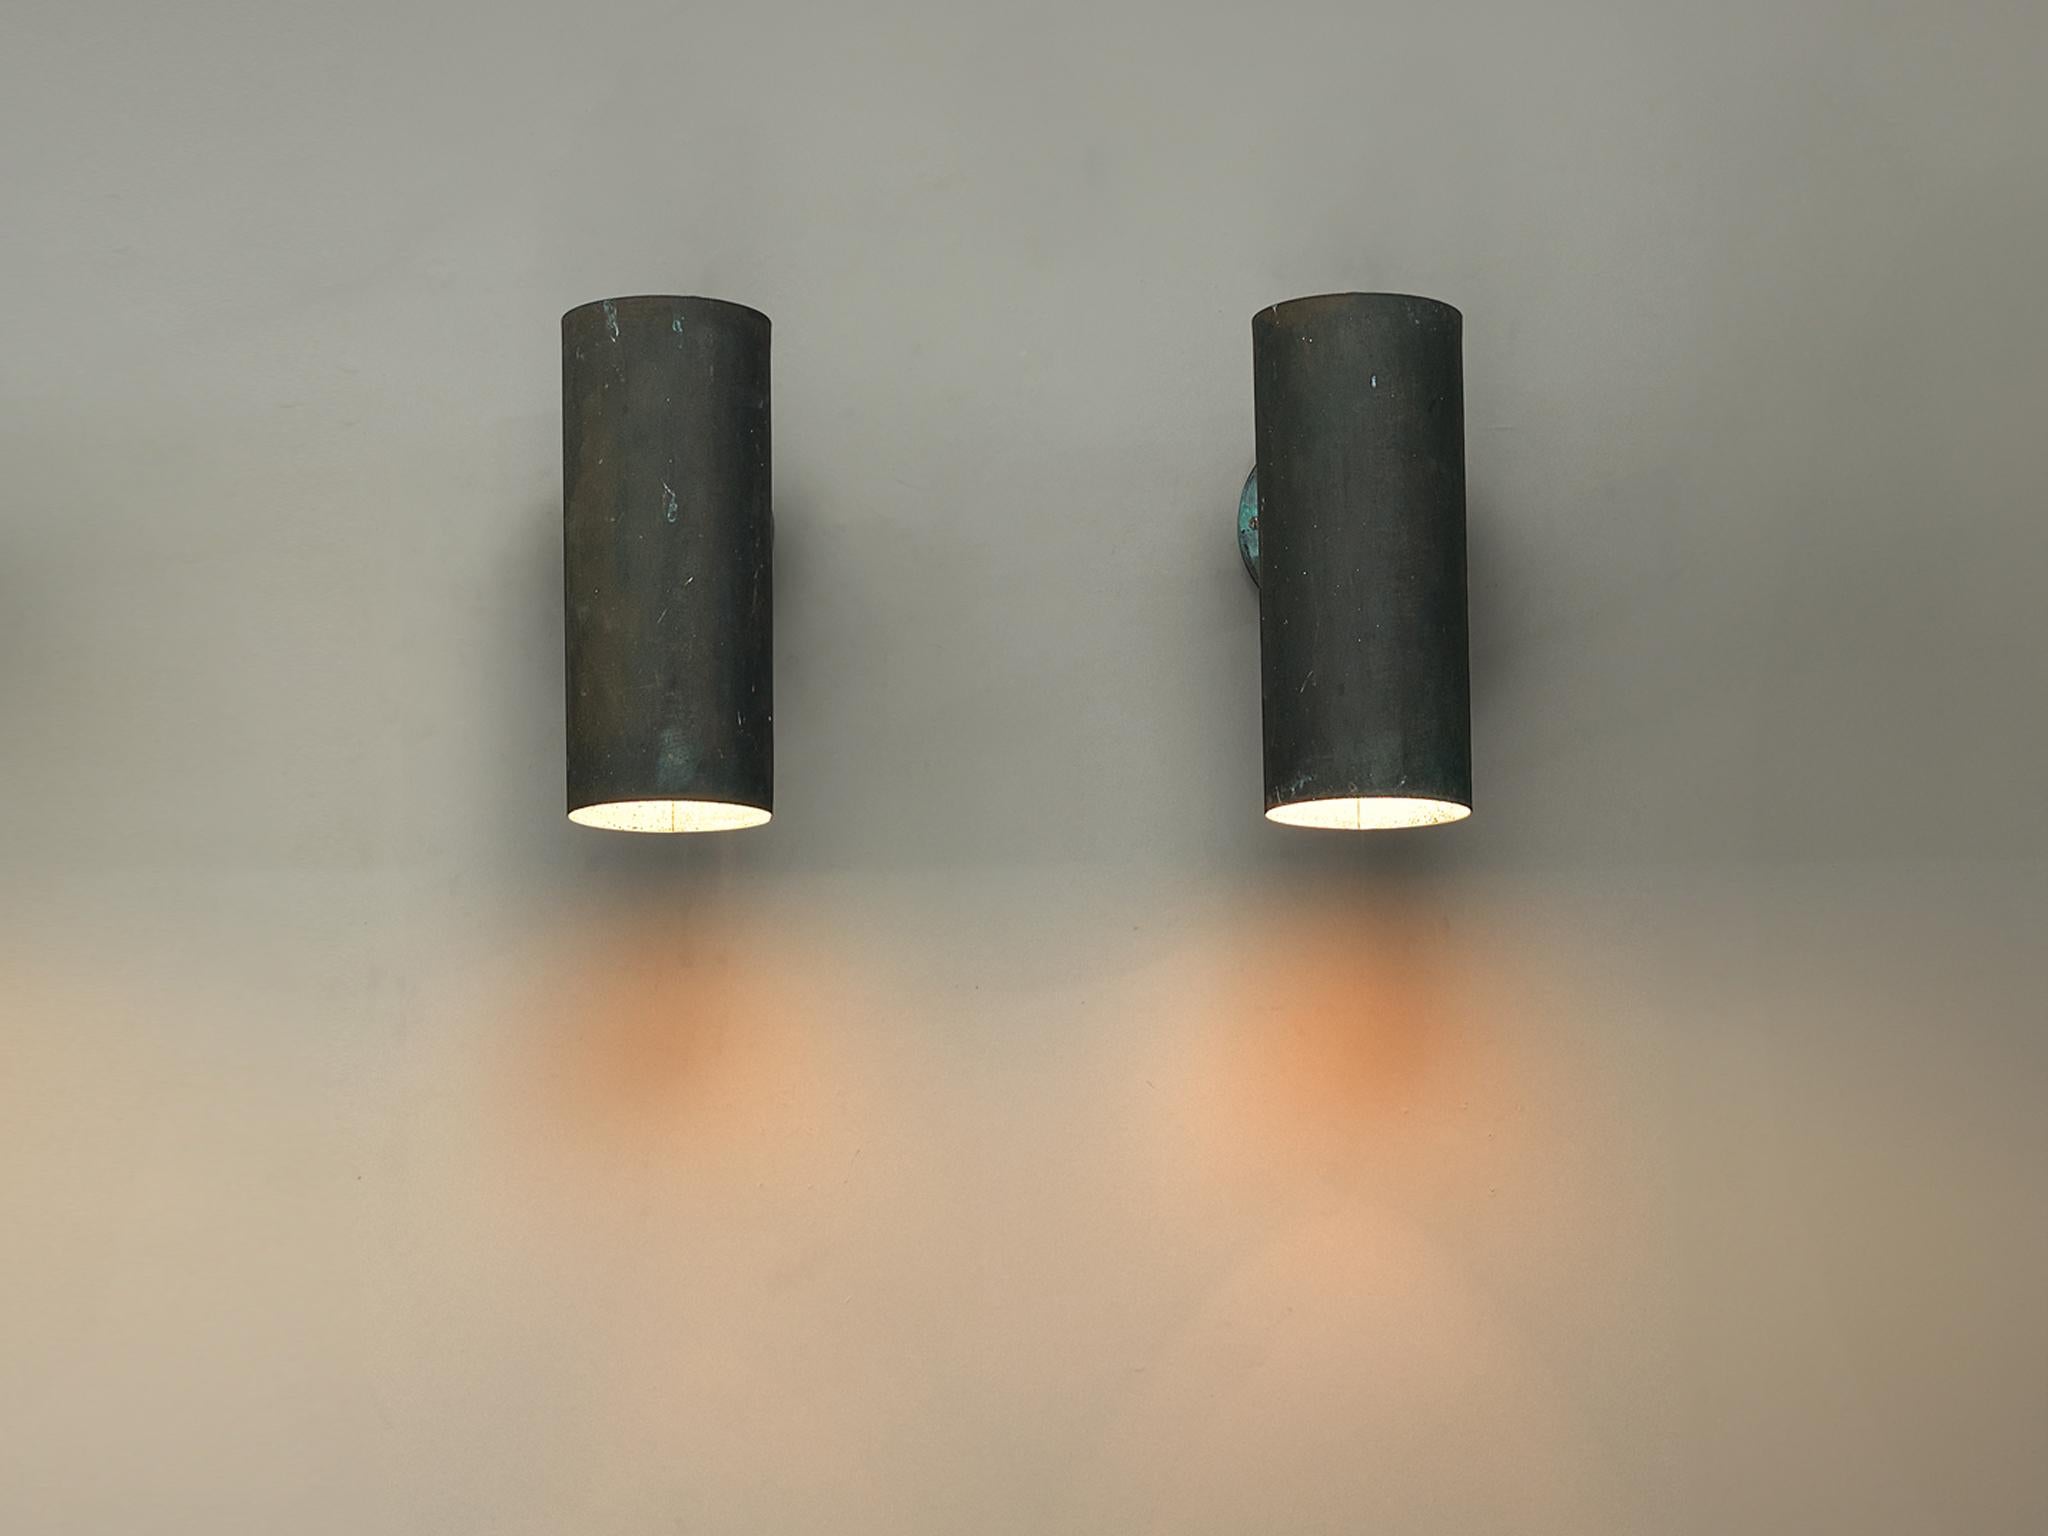 Scandinavian Modern Hans-Agne Jakobsson ‘Rulle’ Wall Lights in Patinated Copper 